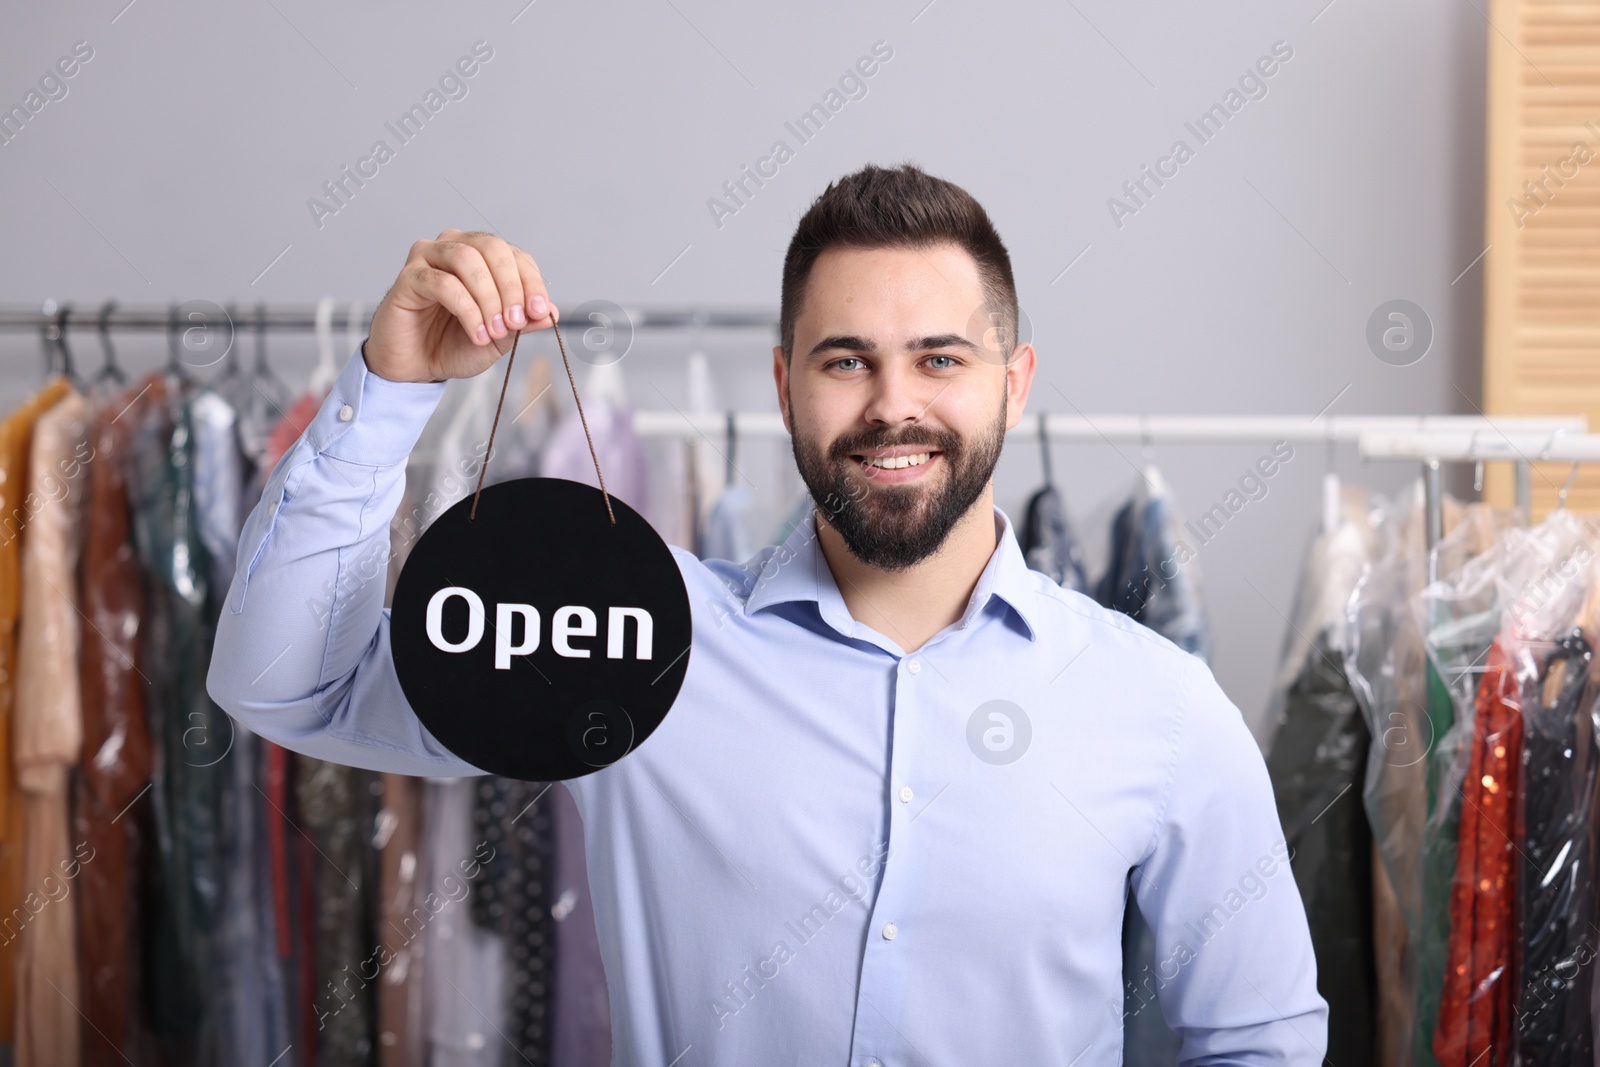 Photo of Dry-cleaning service. Happy worker holding Open sign indoors